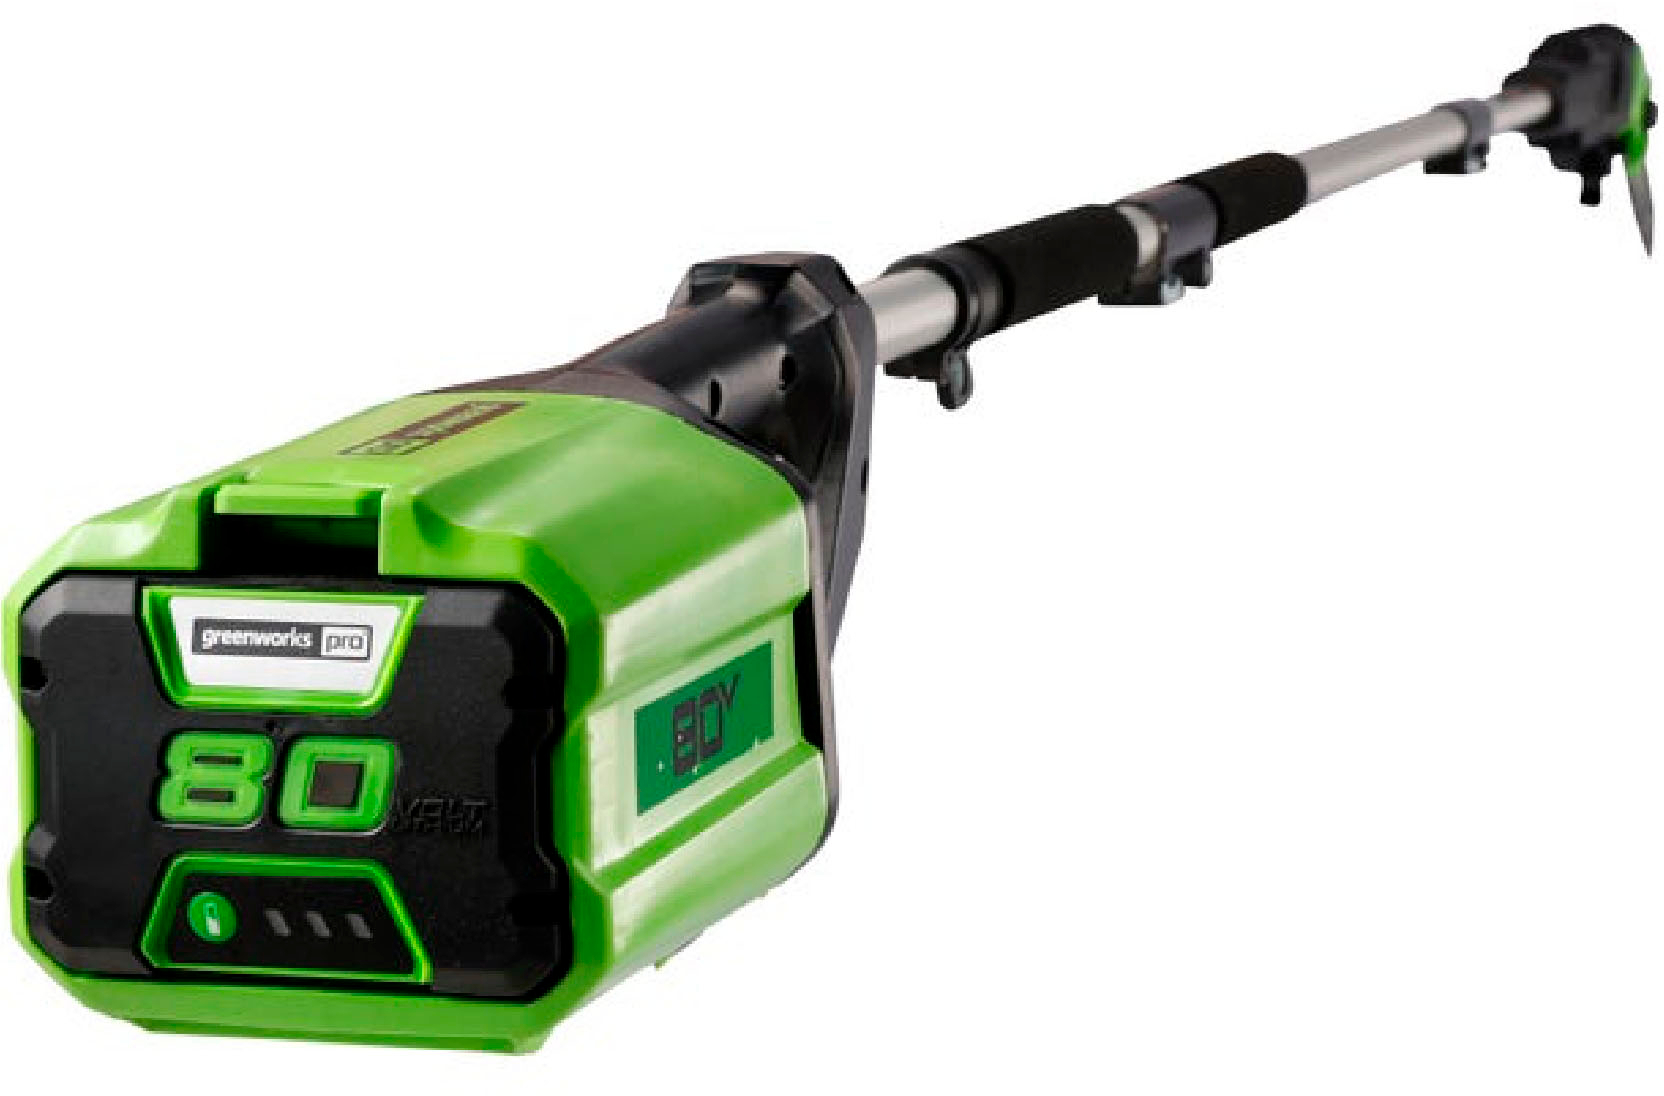 Greenworks PRO 80V 10” Brushless Cordless Polesaw 2Ah Battery Included PS80L210 